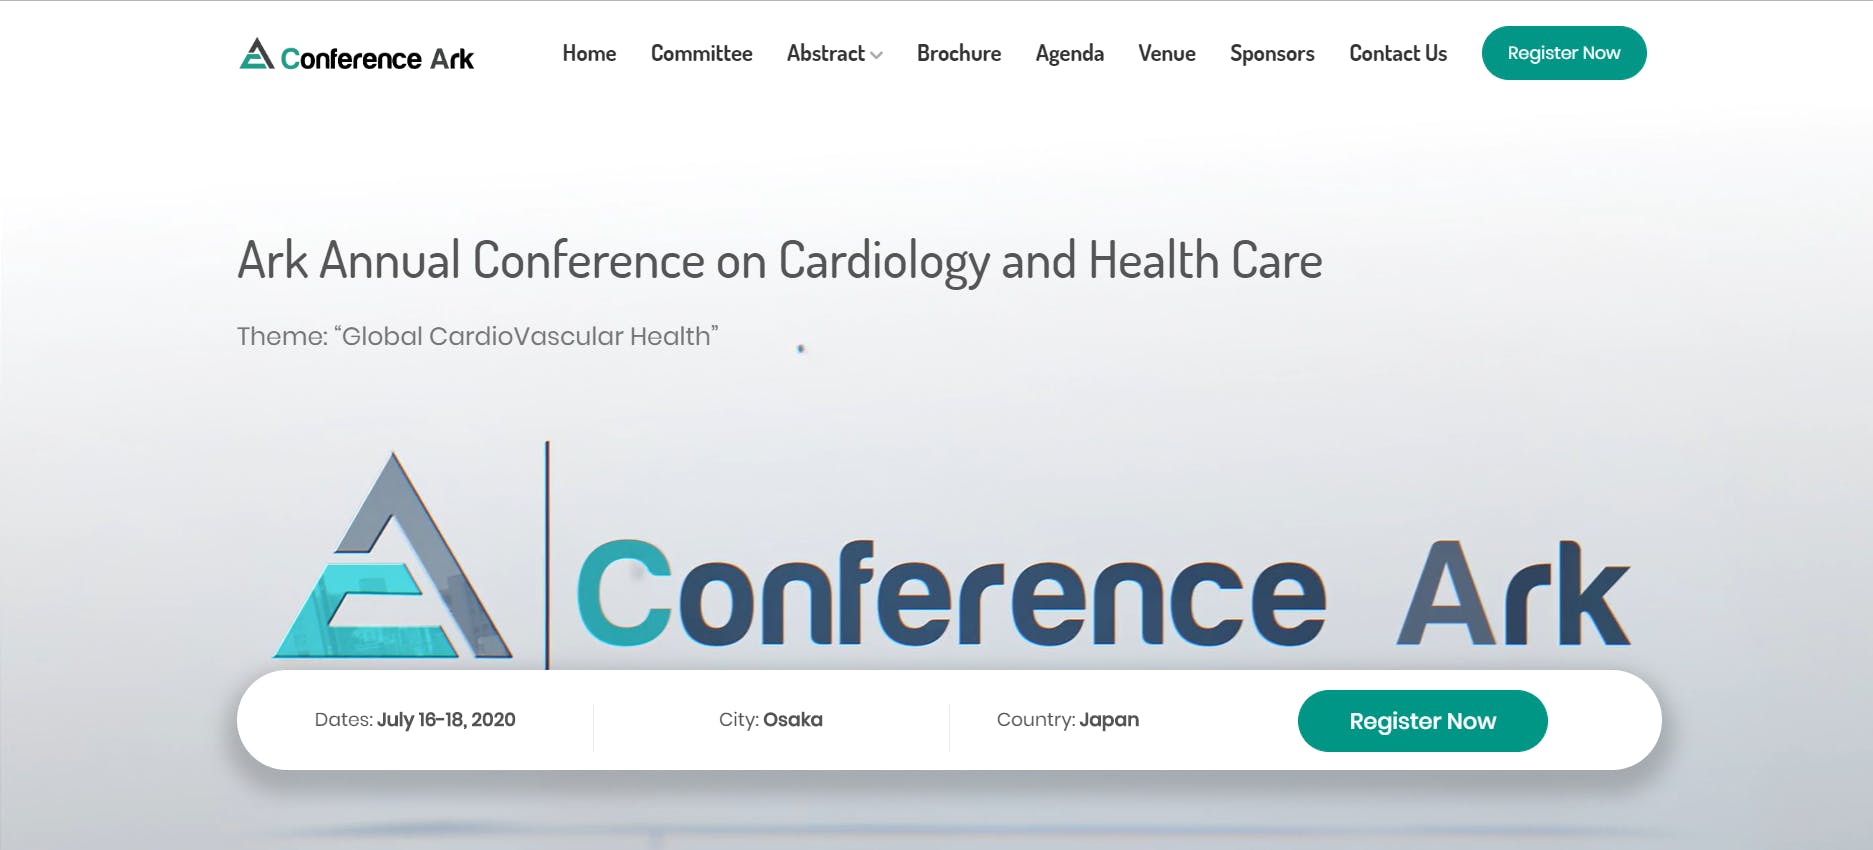 Ark Annual Conference on Cardiology and Health Care